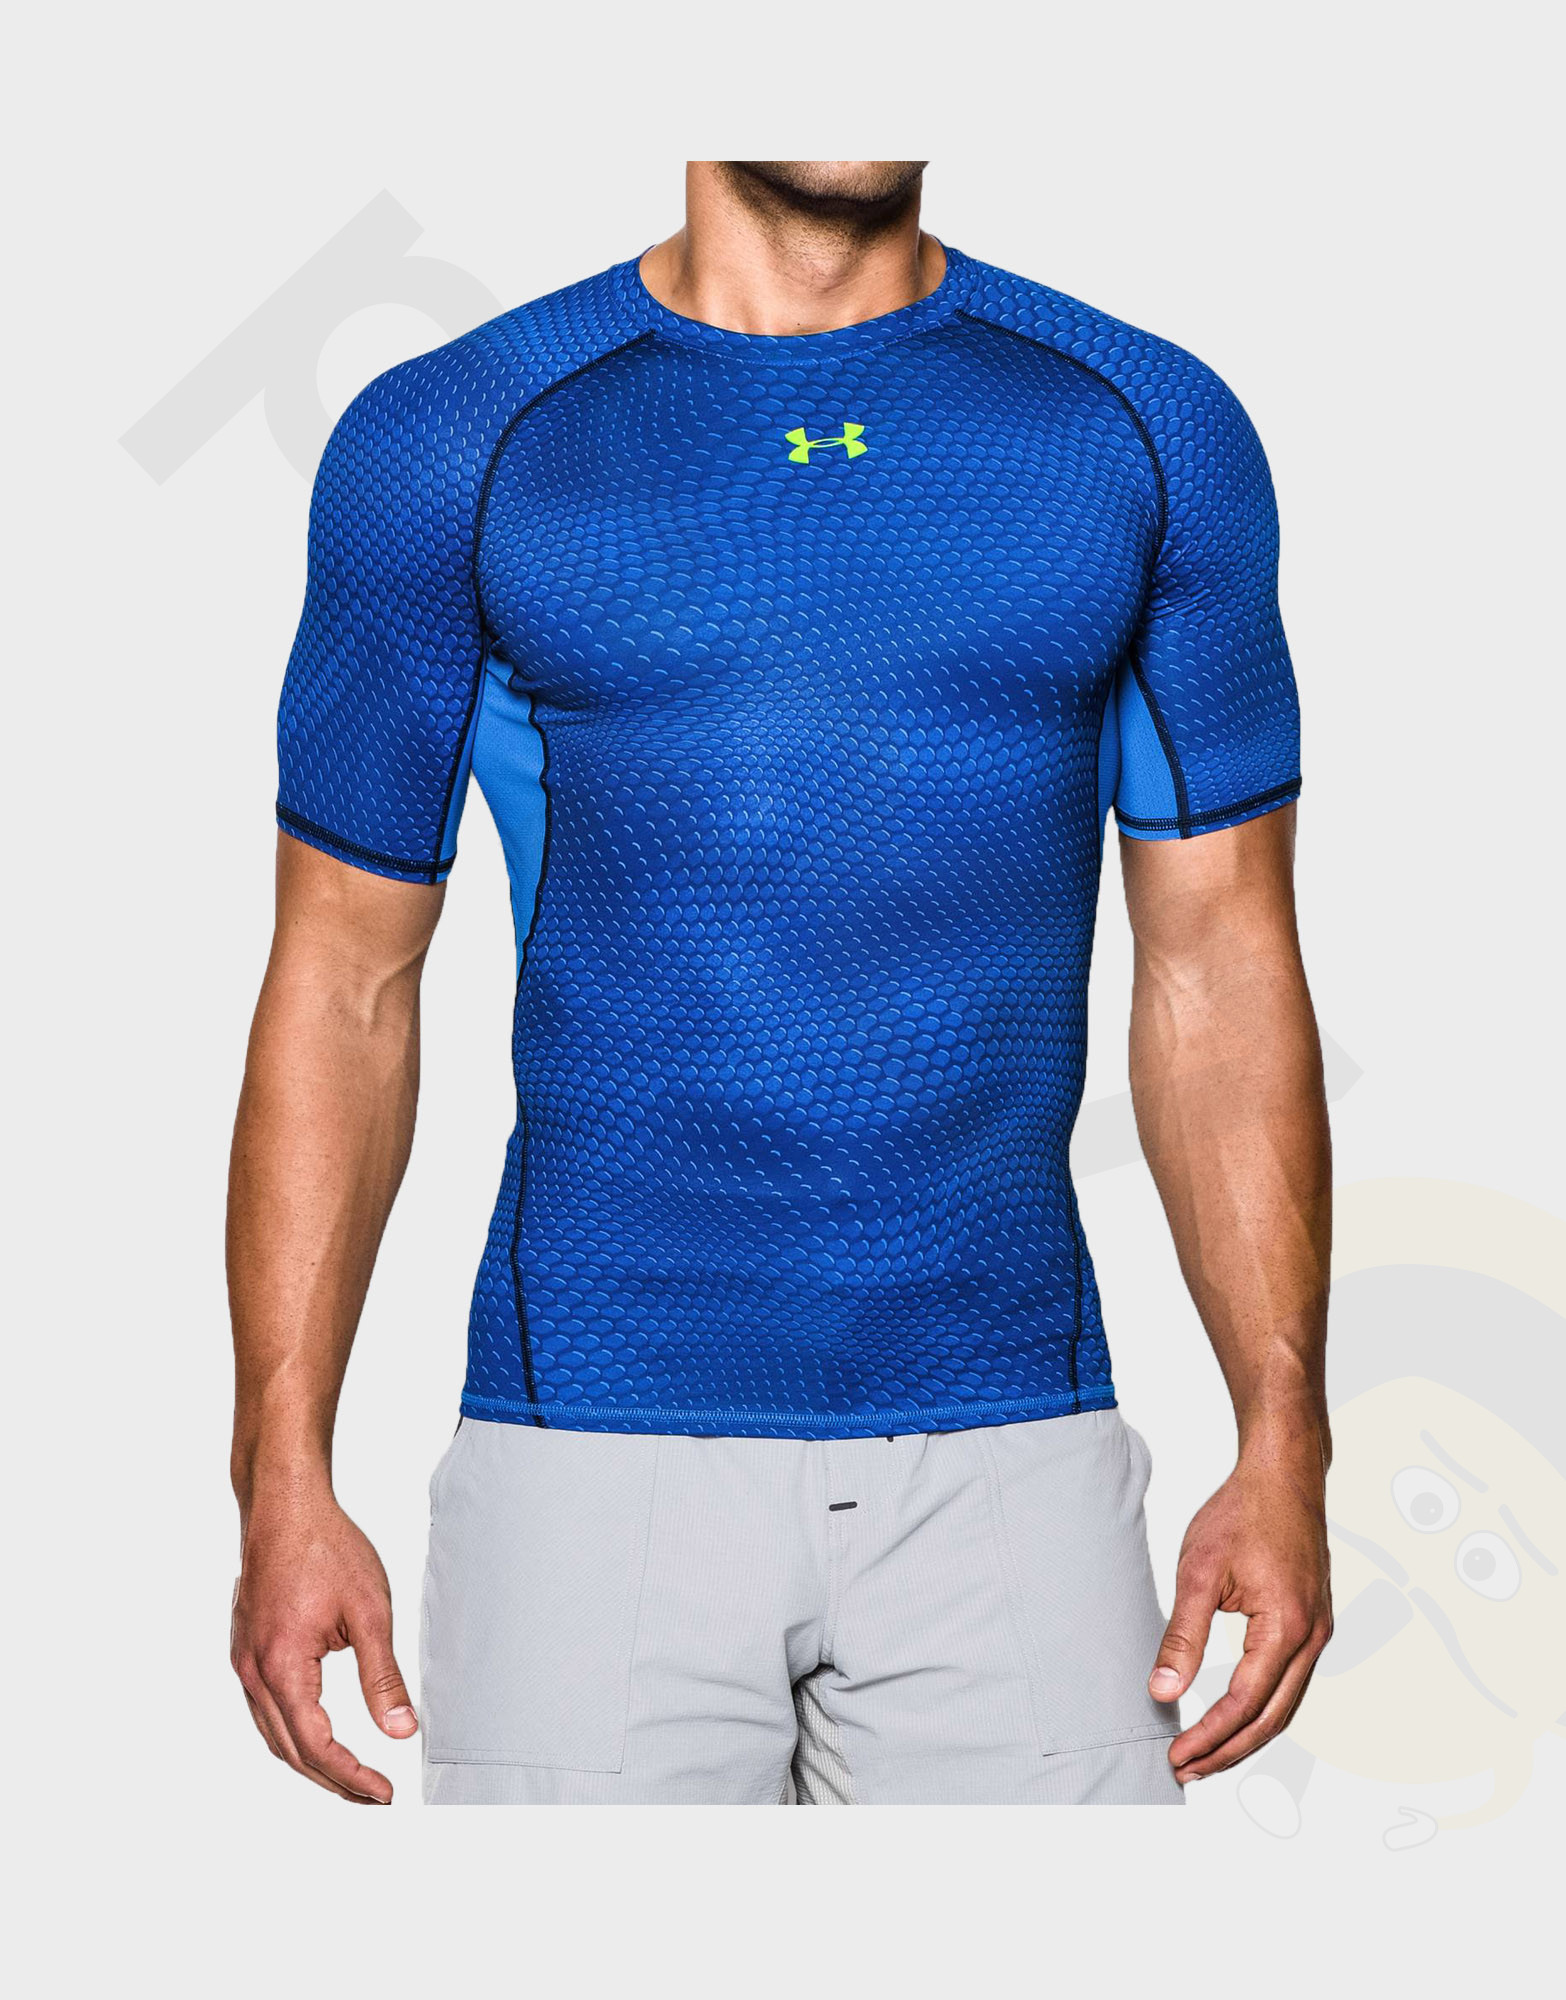 under armour personalized shirts